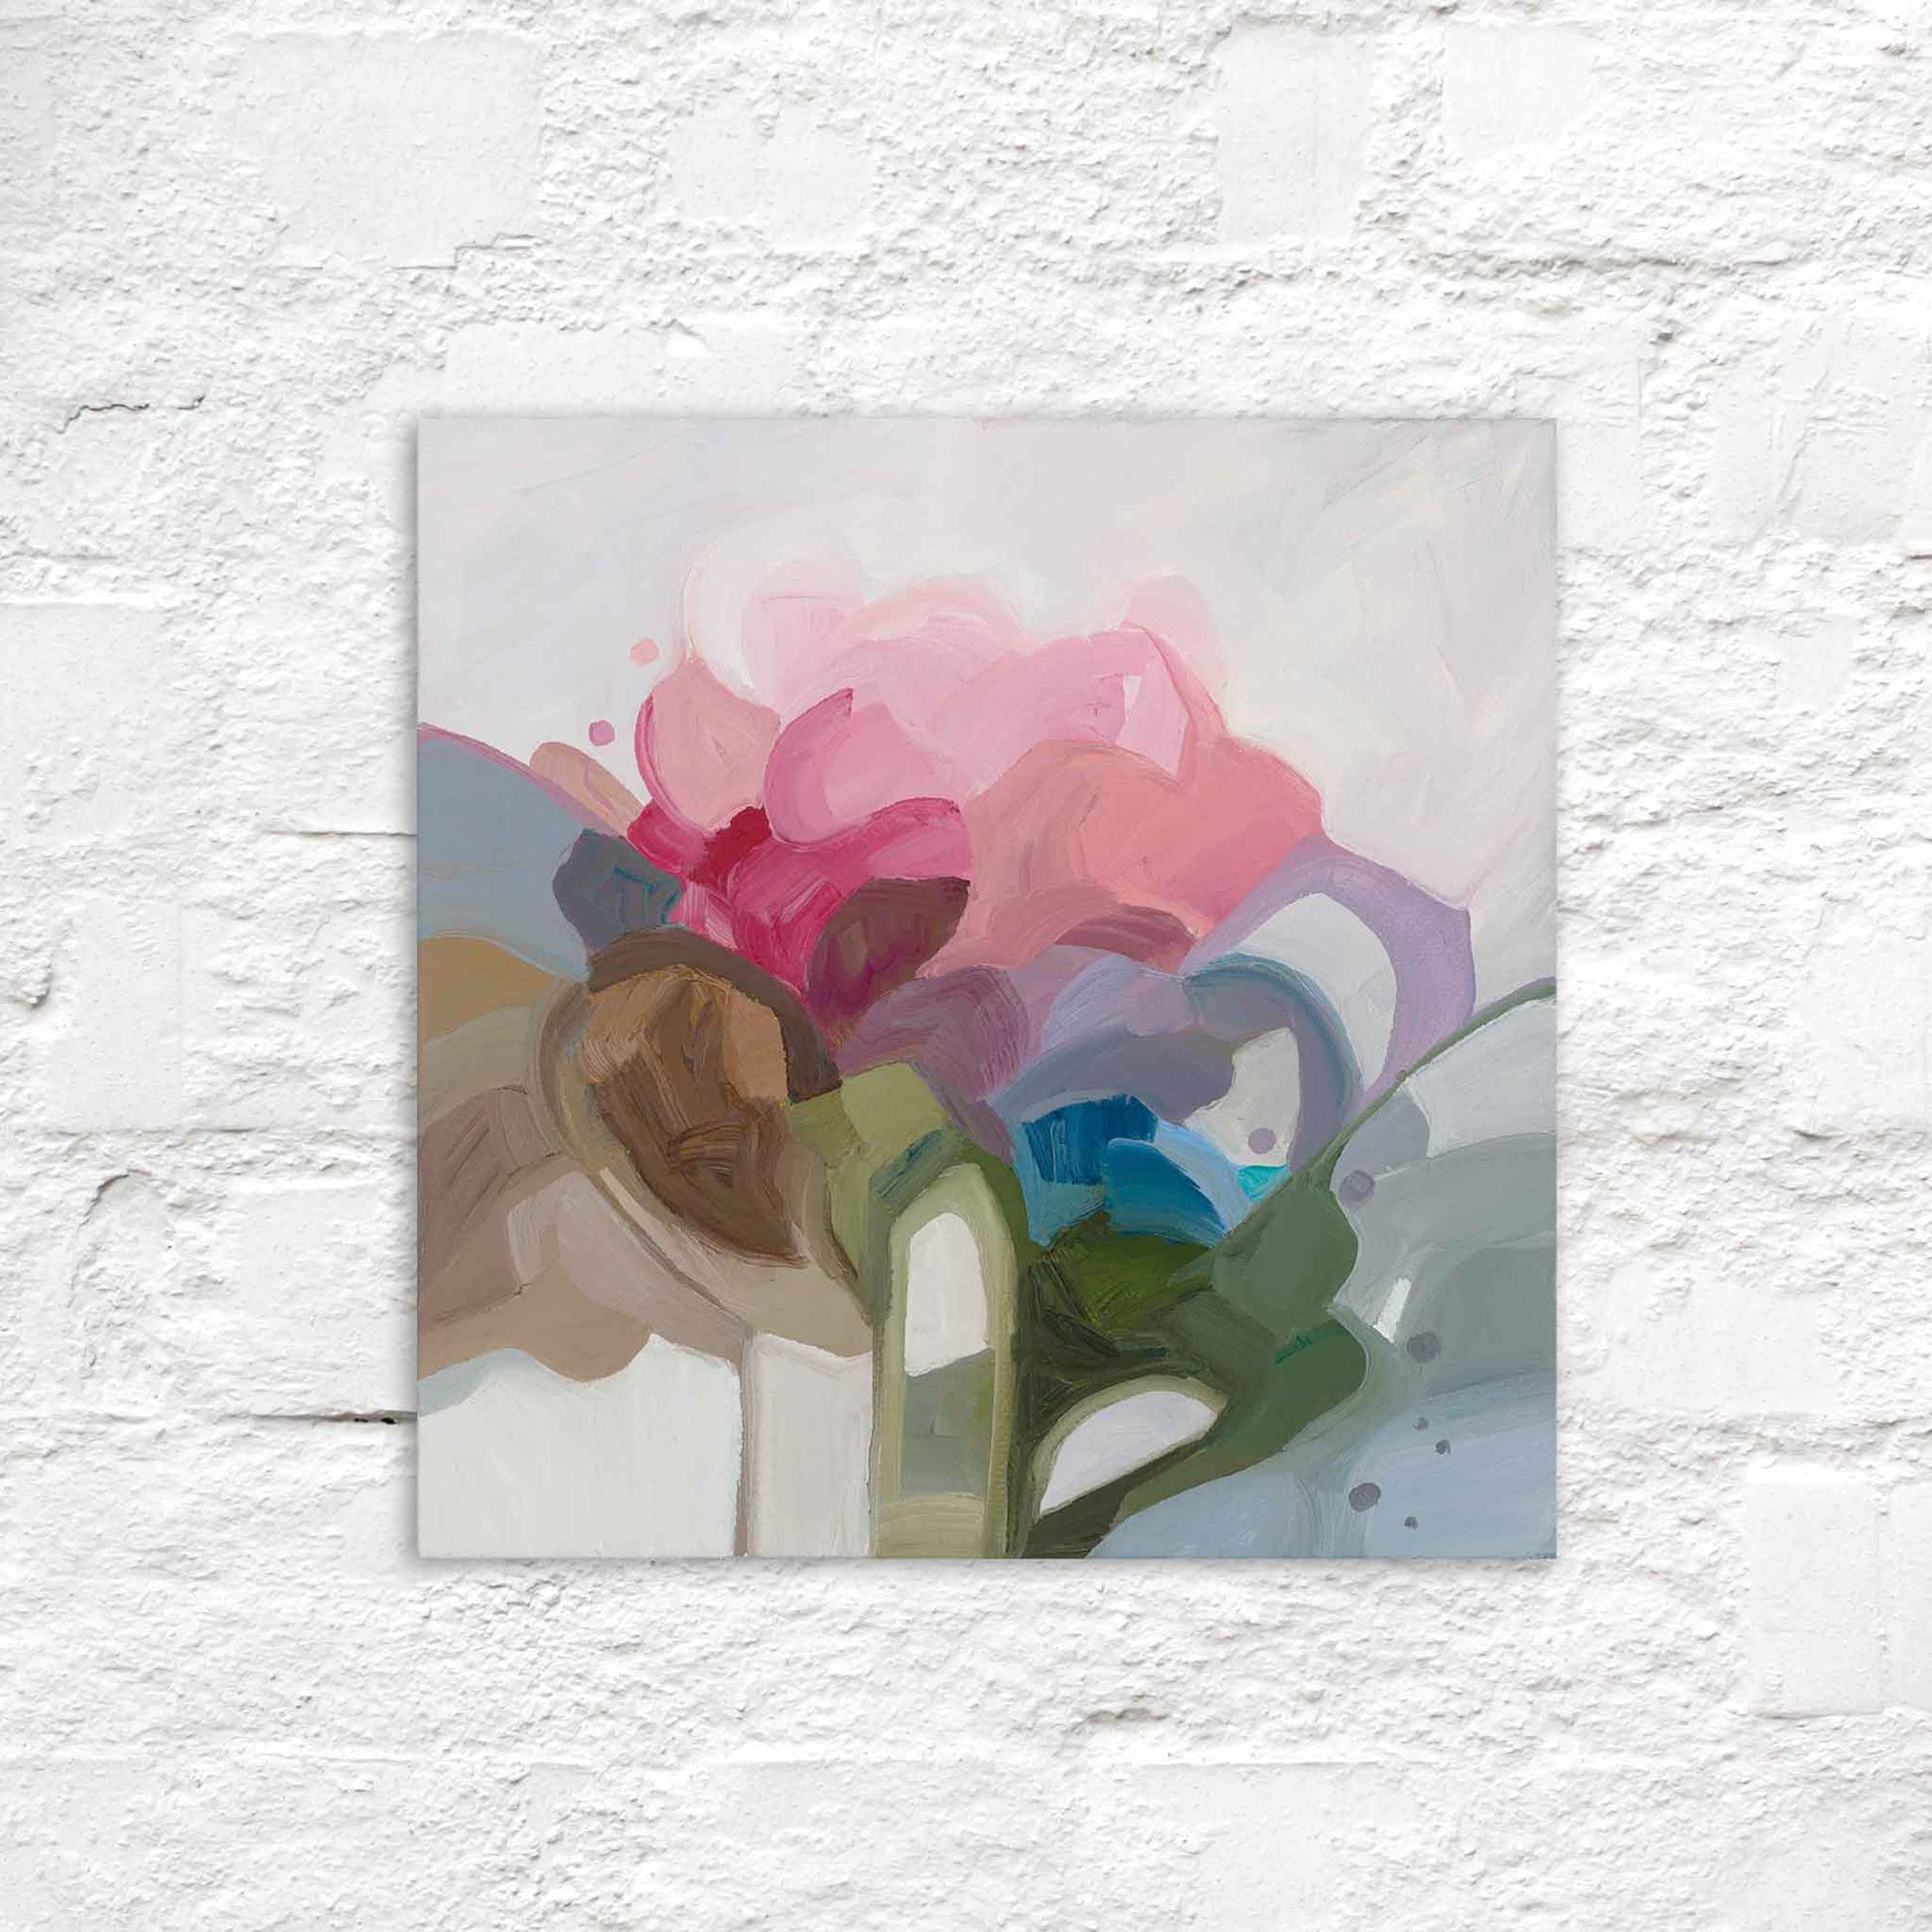 small square abstract oil painting on canvas in magenta pink mauve green and taupe